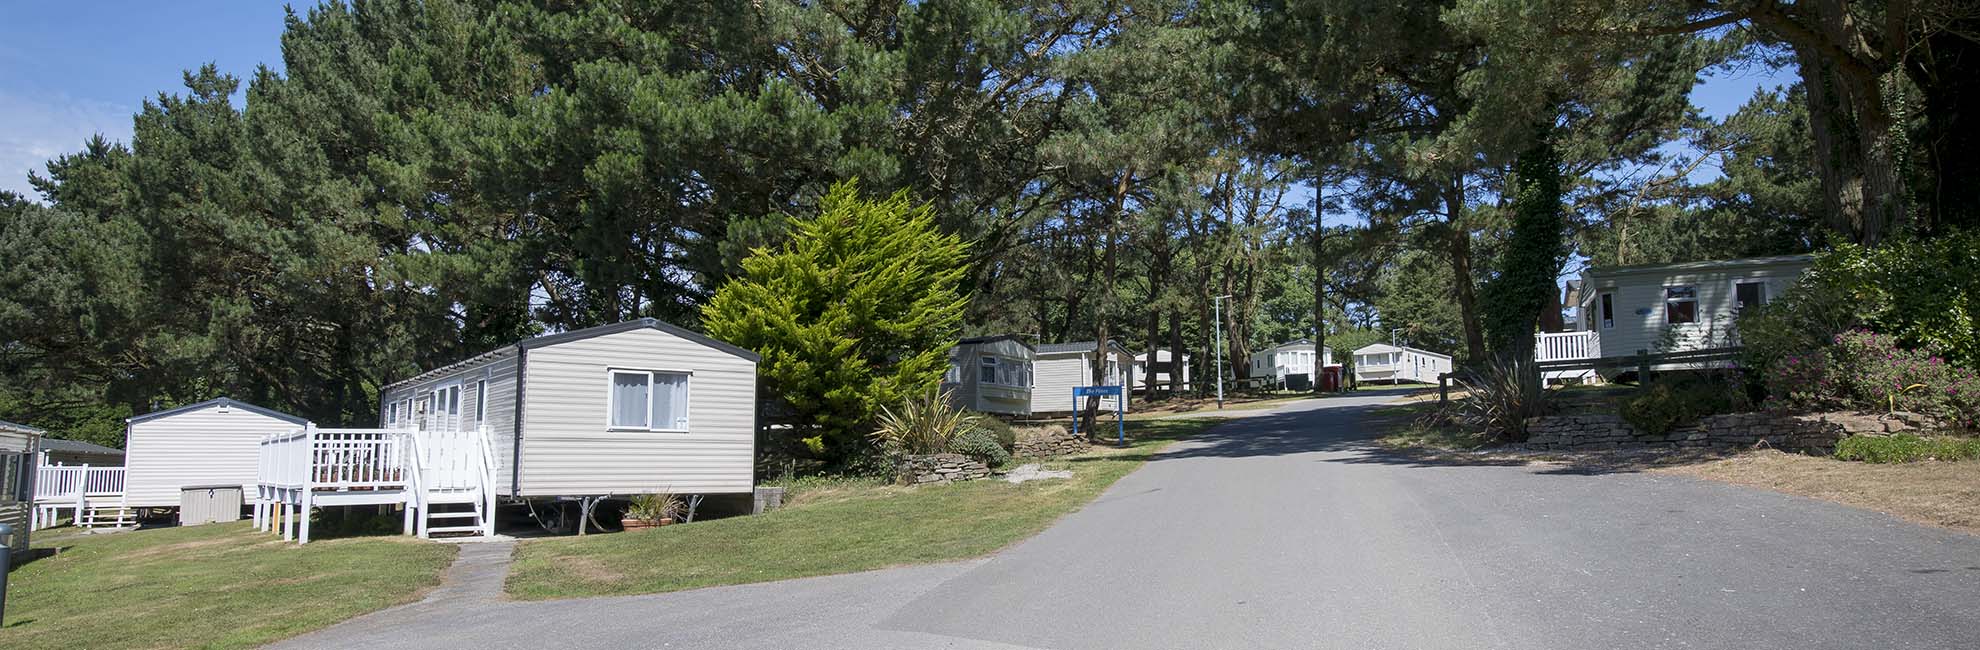 Caravans on a leafy hillside at Newquay Holiday Park in Cornwall